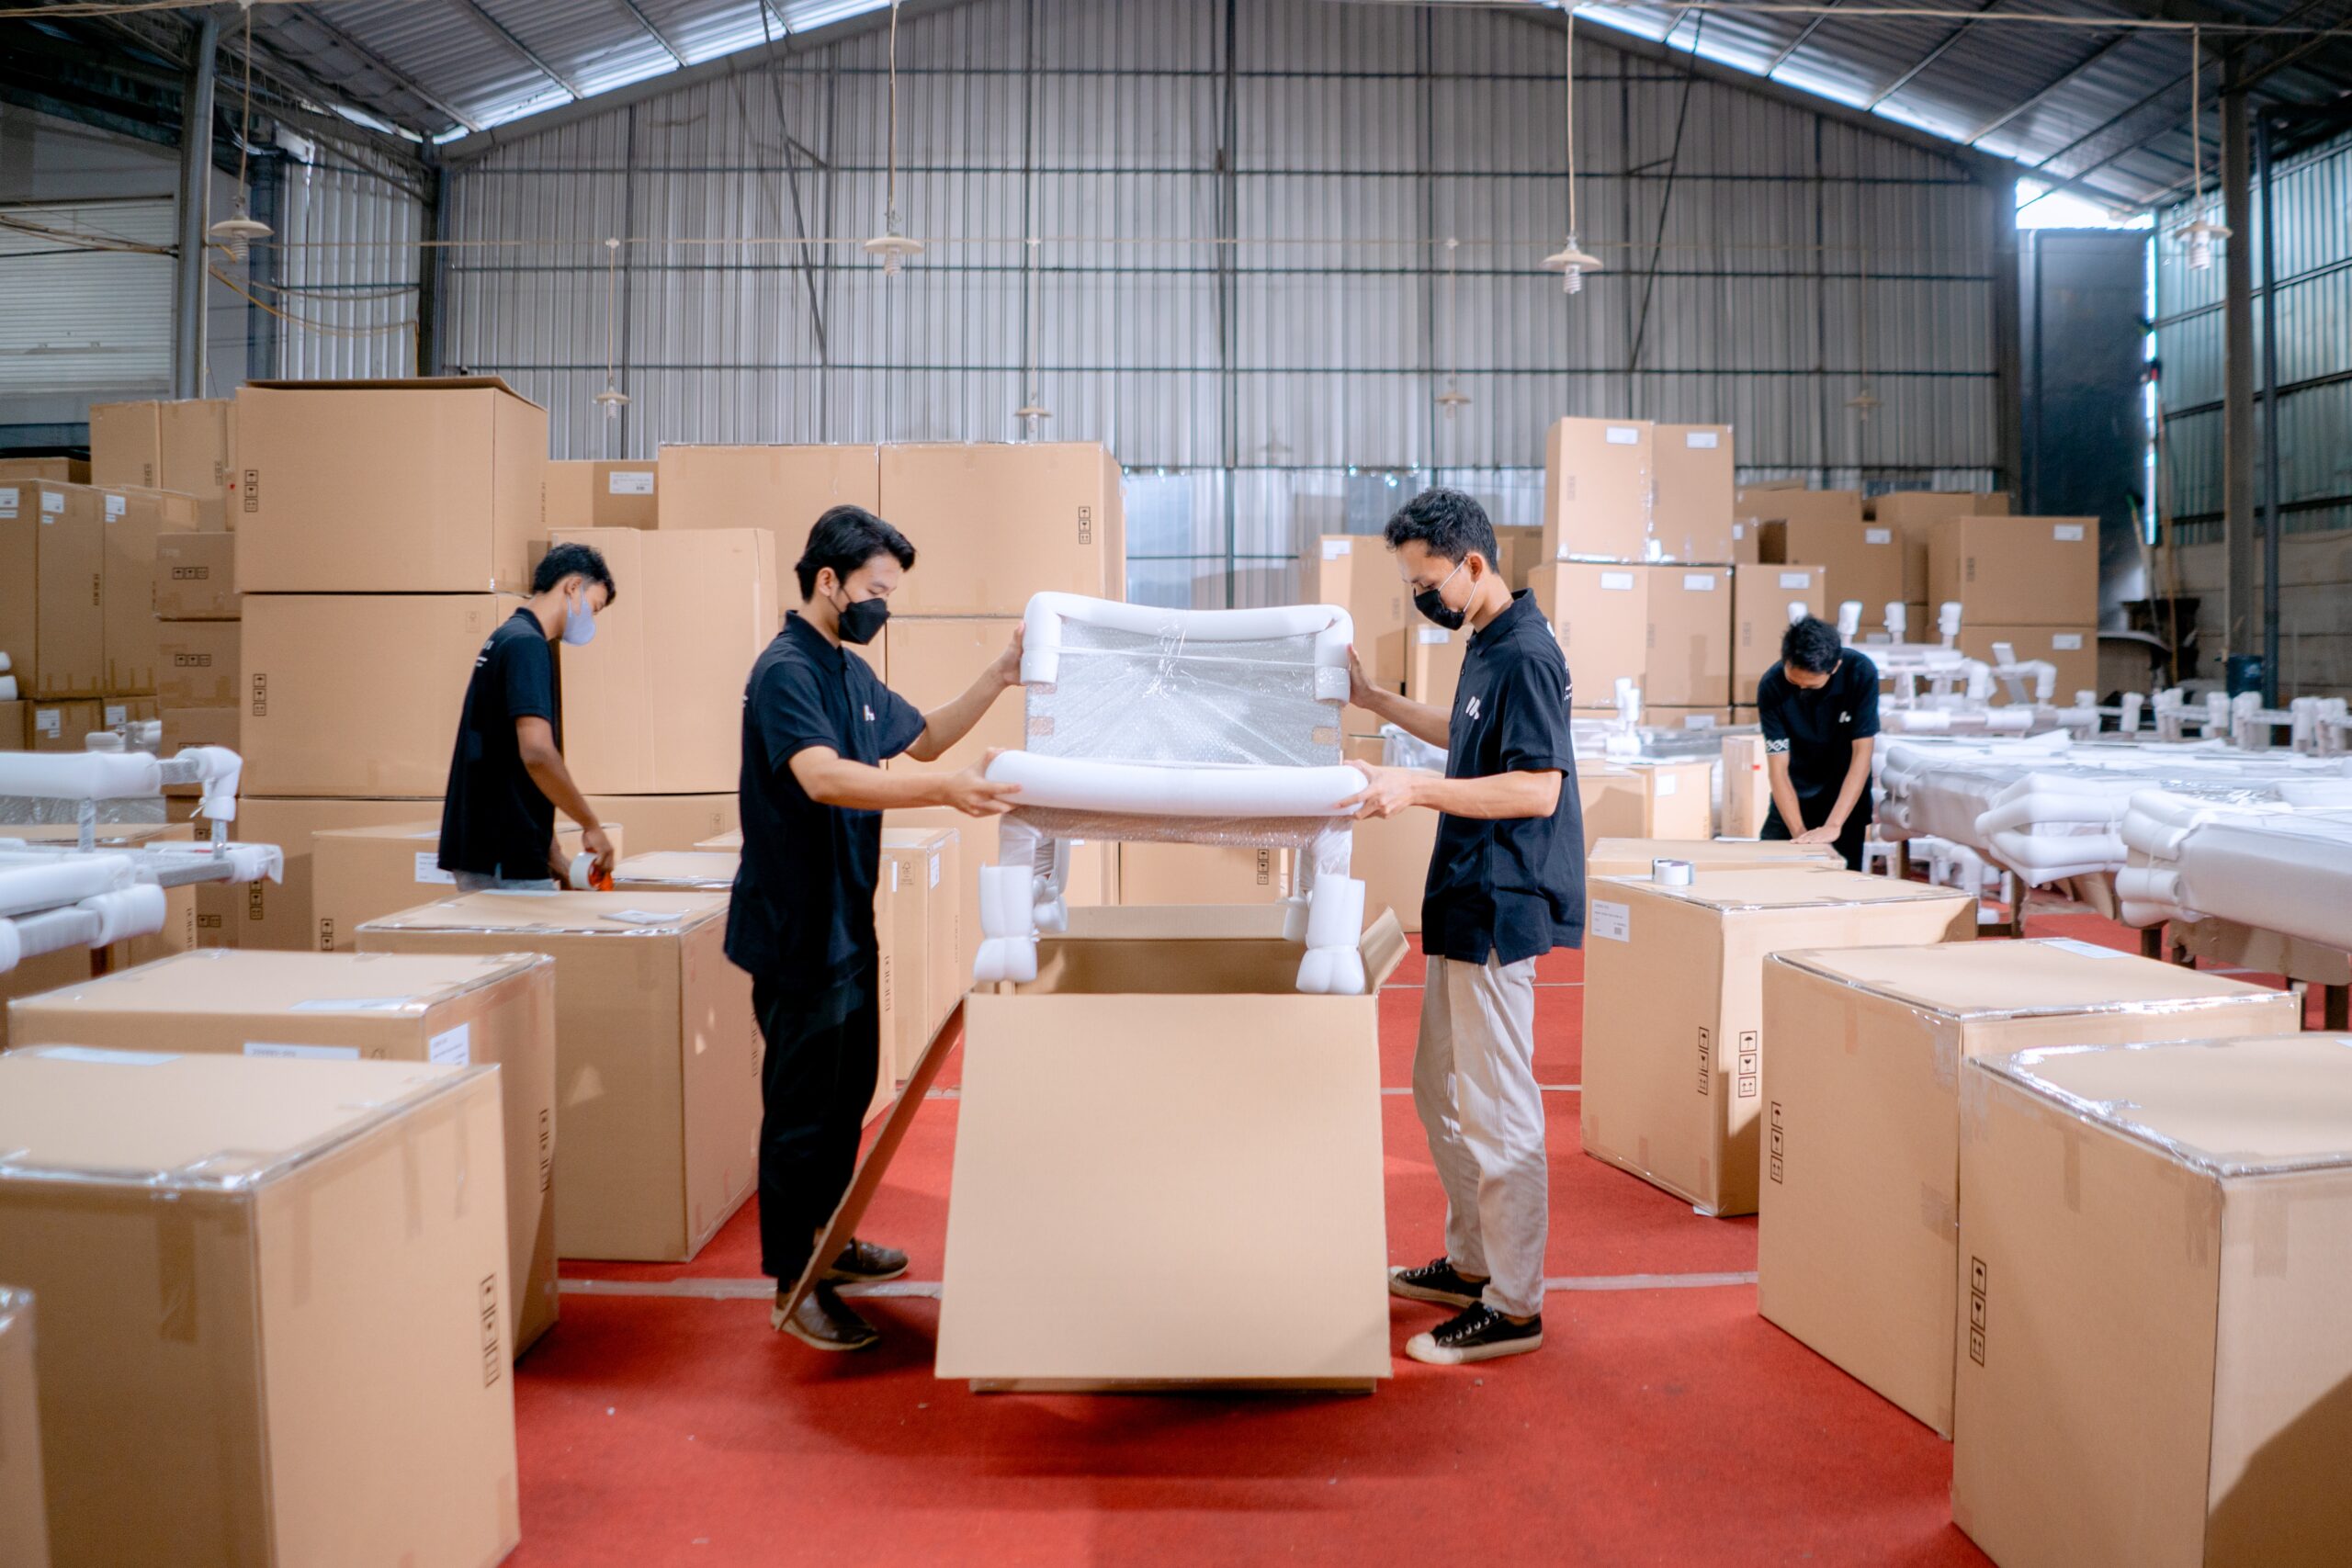 Experienced warehouse workers carefully unpack and inspect recently received furniture items. With meticulous attention to detail, they handle a chair with utmost care, ensuring it is in pristine condition. Trust Diego Delivery for reliable and thorough inspection of your shipments for a seamless receiving process.